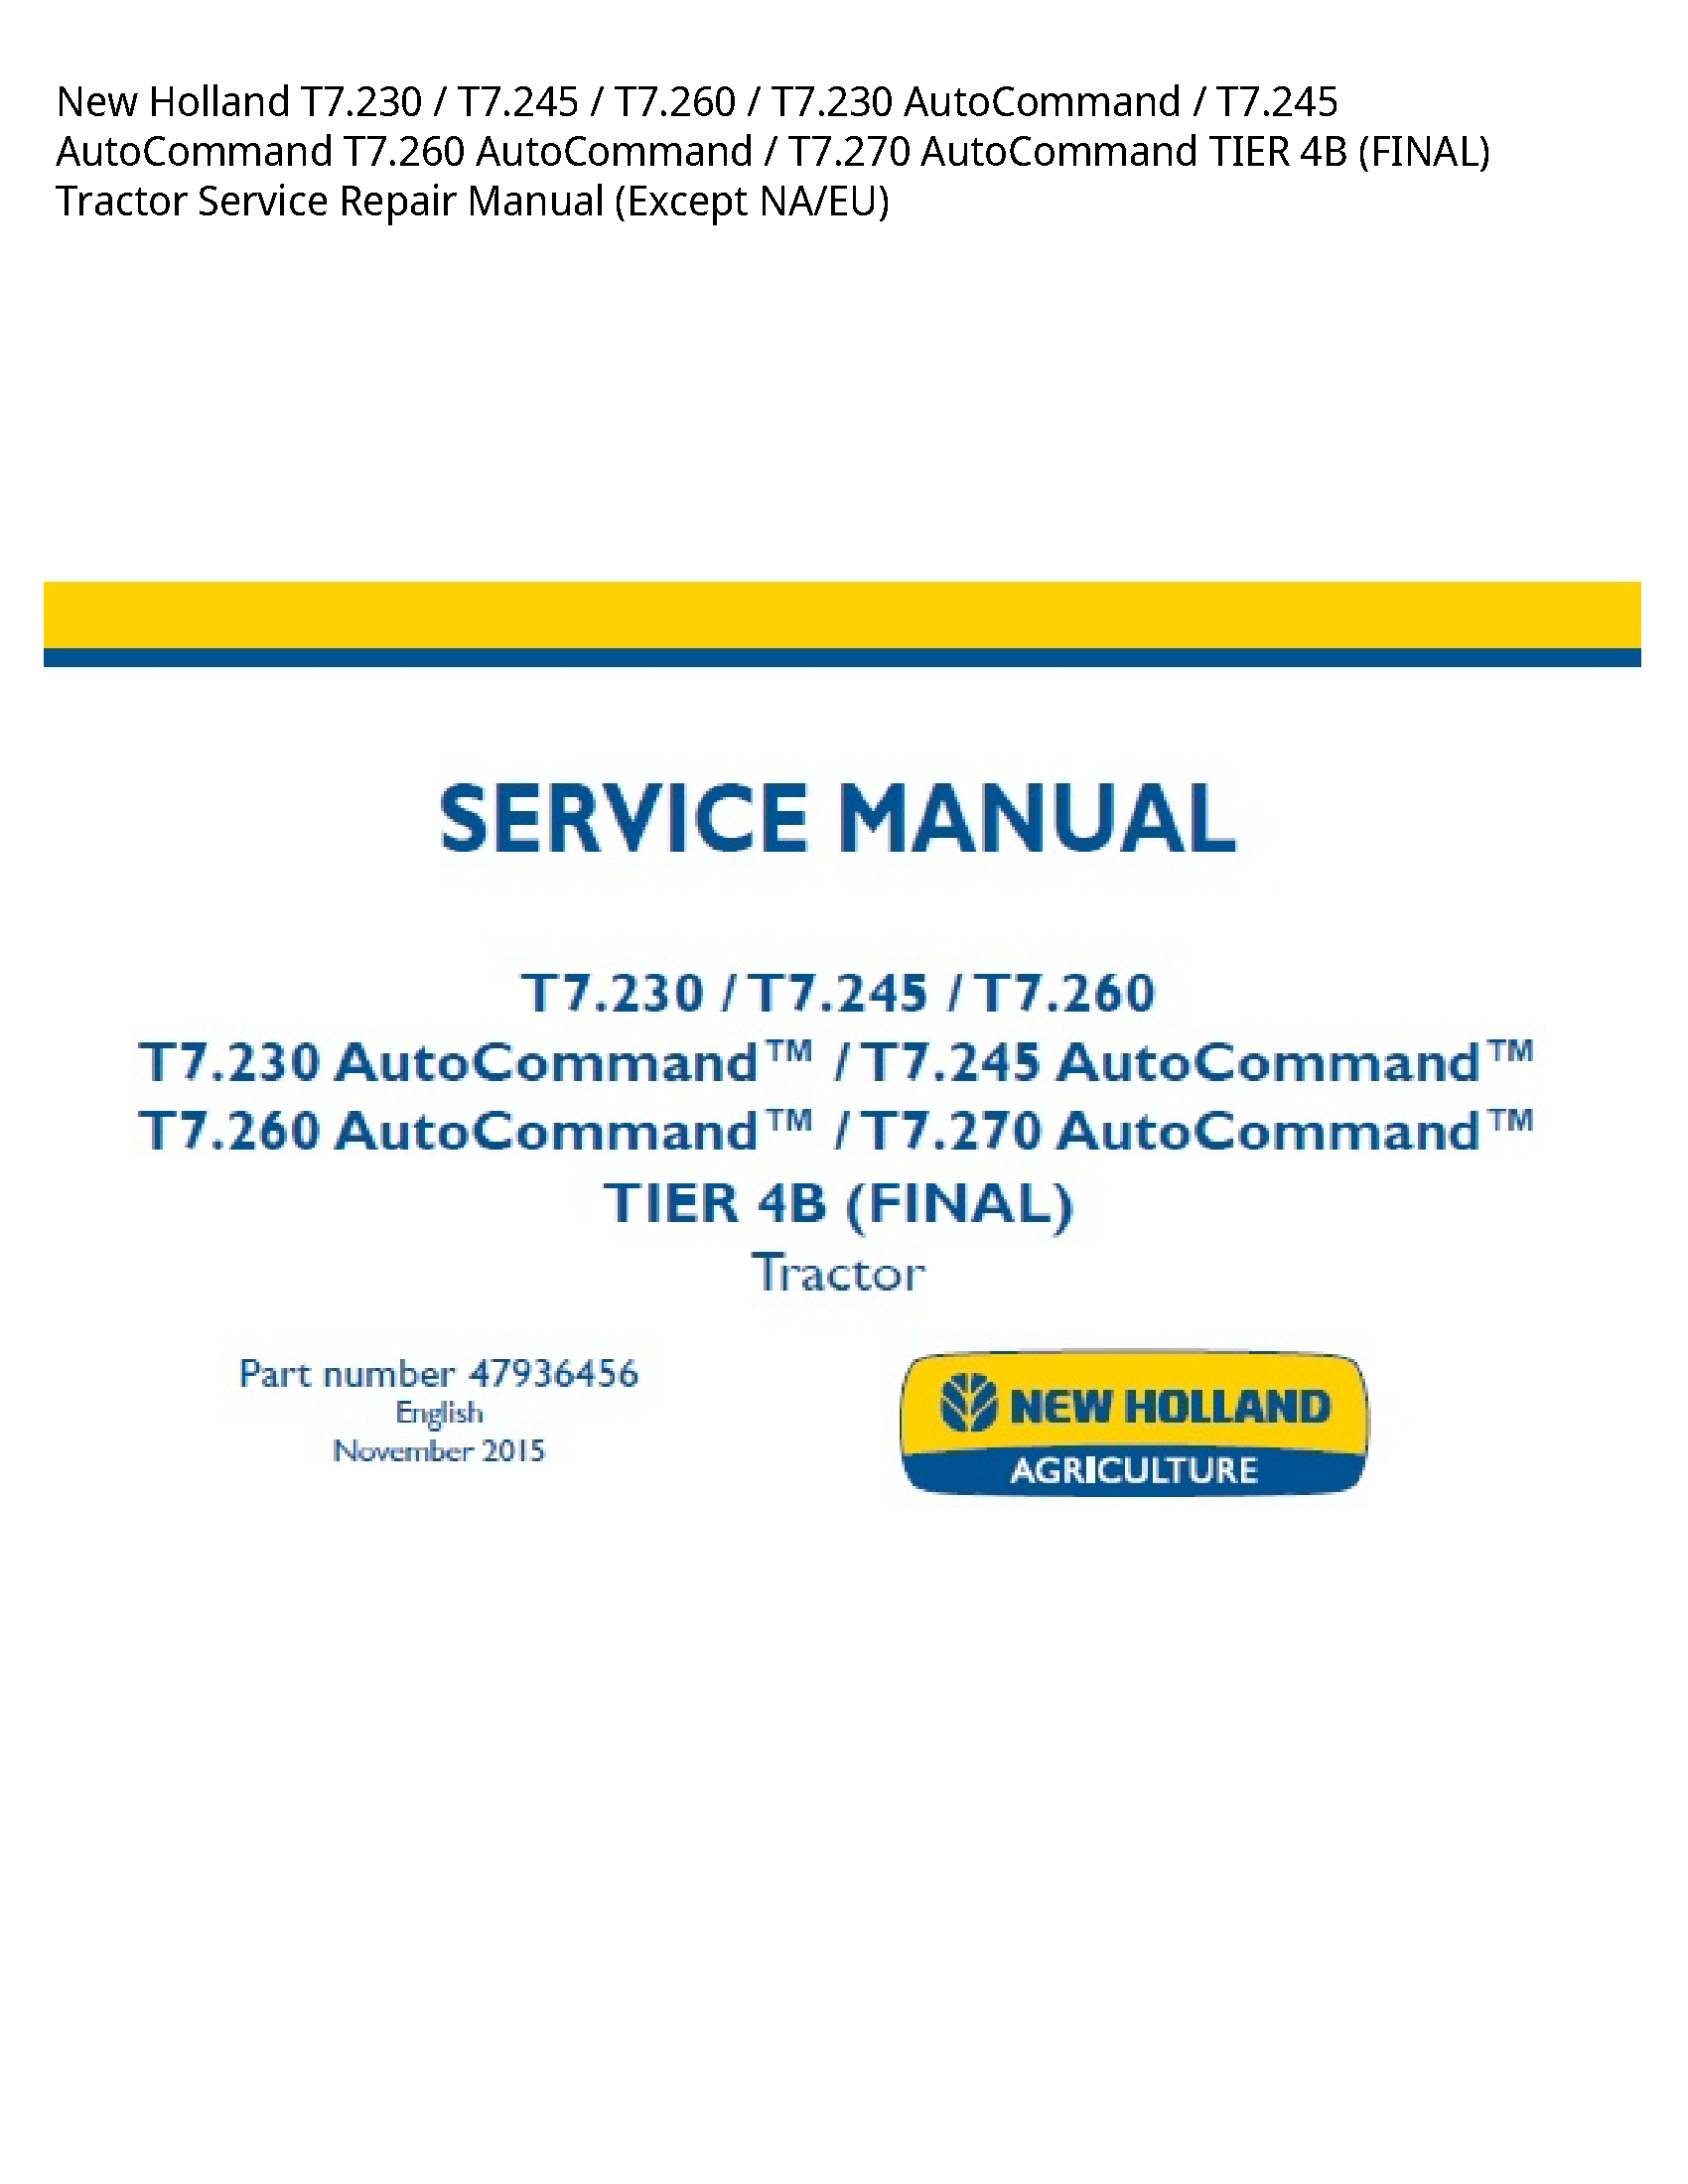 New Holland T7.230 AutoCommand AutoCommand AutoCommand AutoCommand TIER (FINAL) Tractor manual